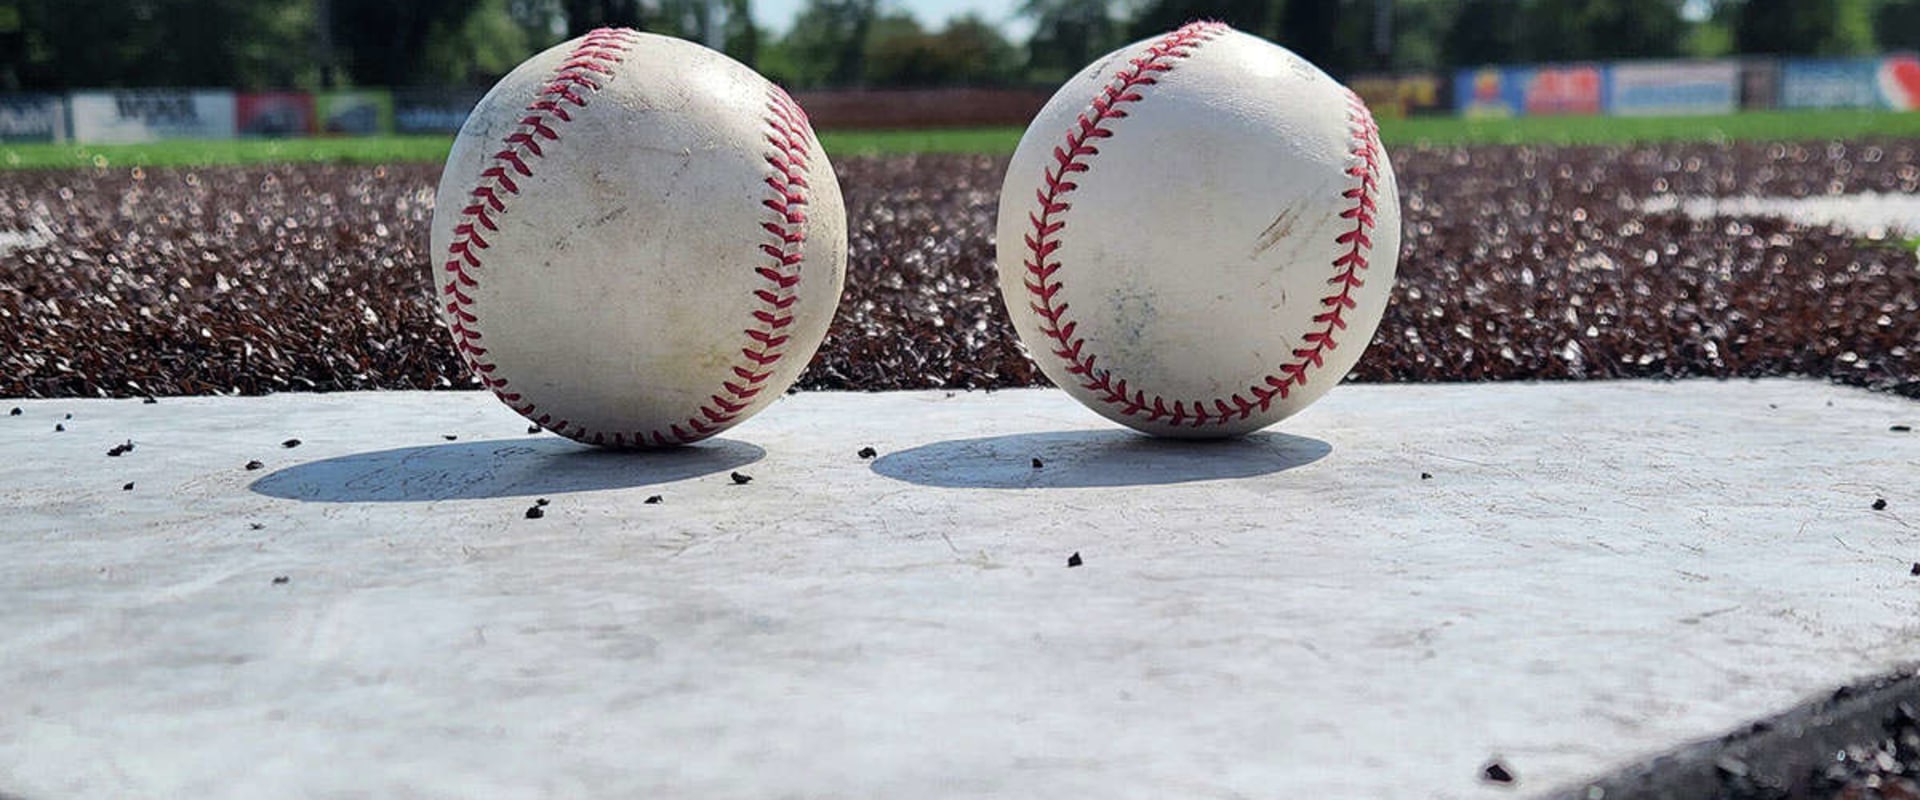 What Are the Fees for Joining a Baseball League in Greenwood, South Carolina?